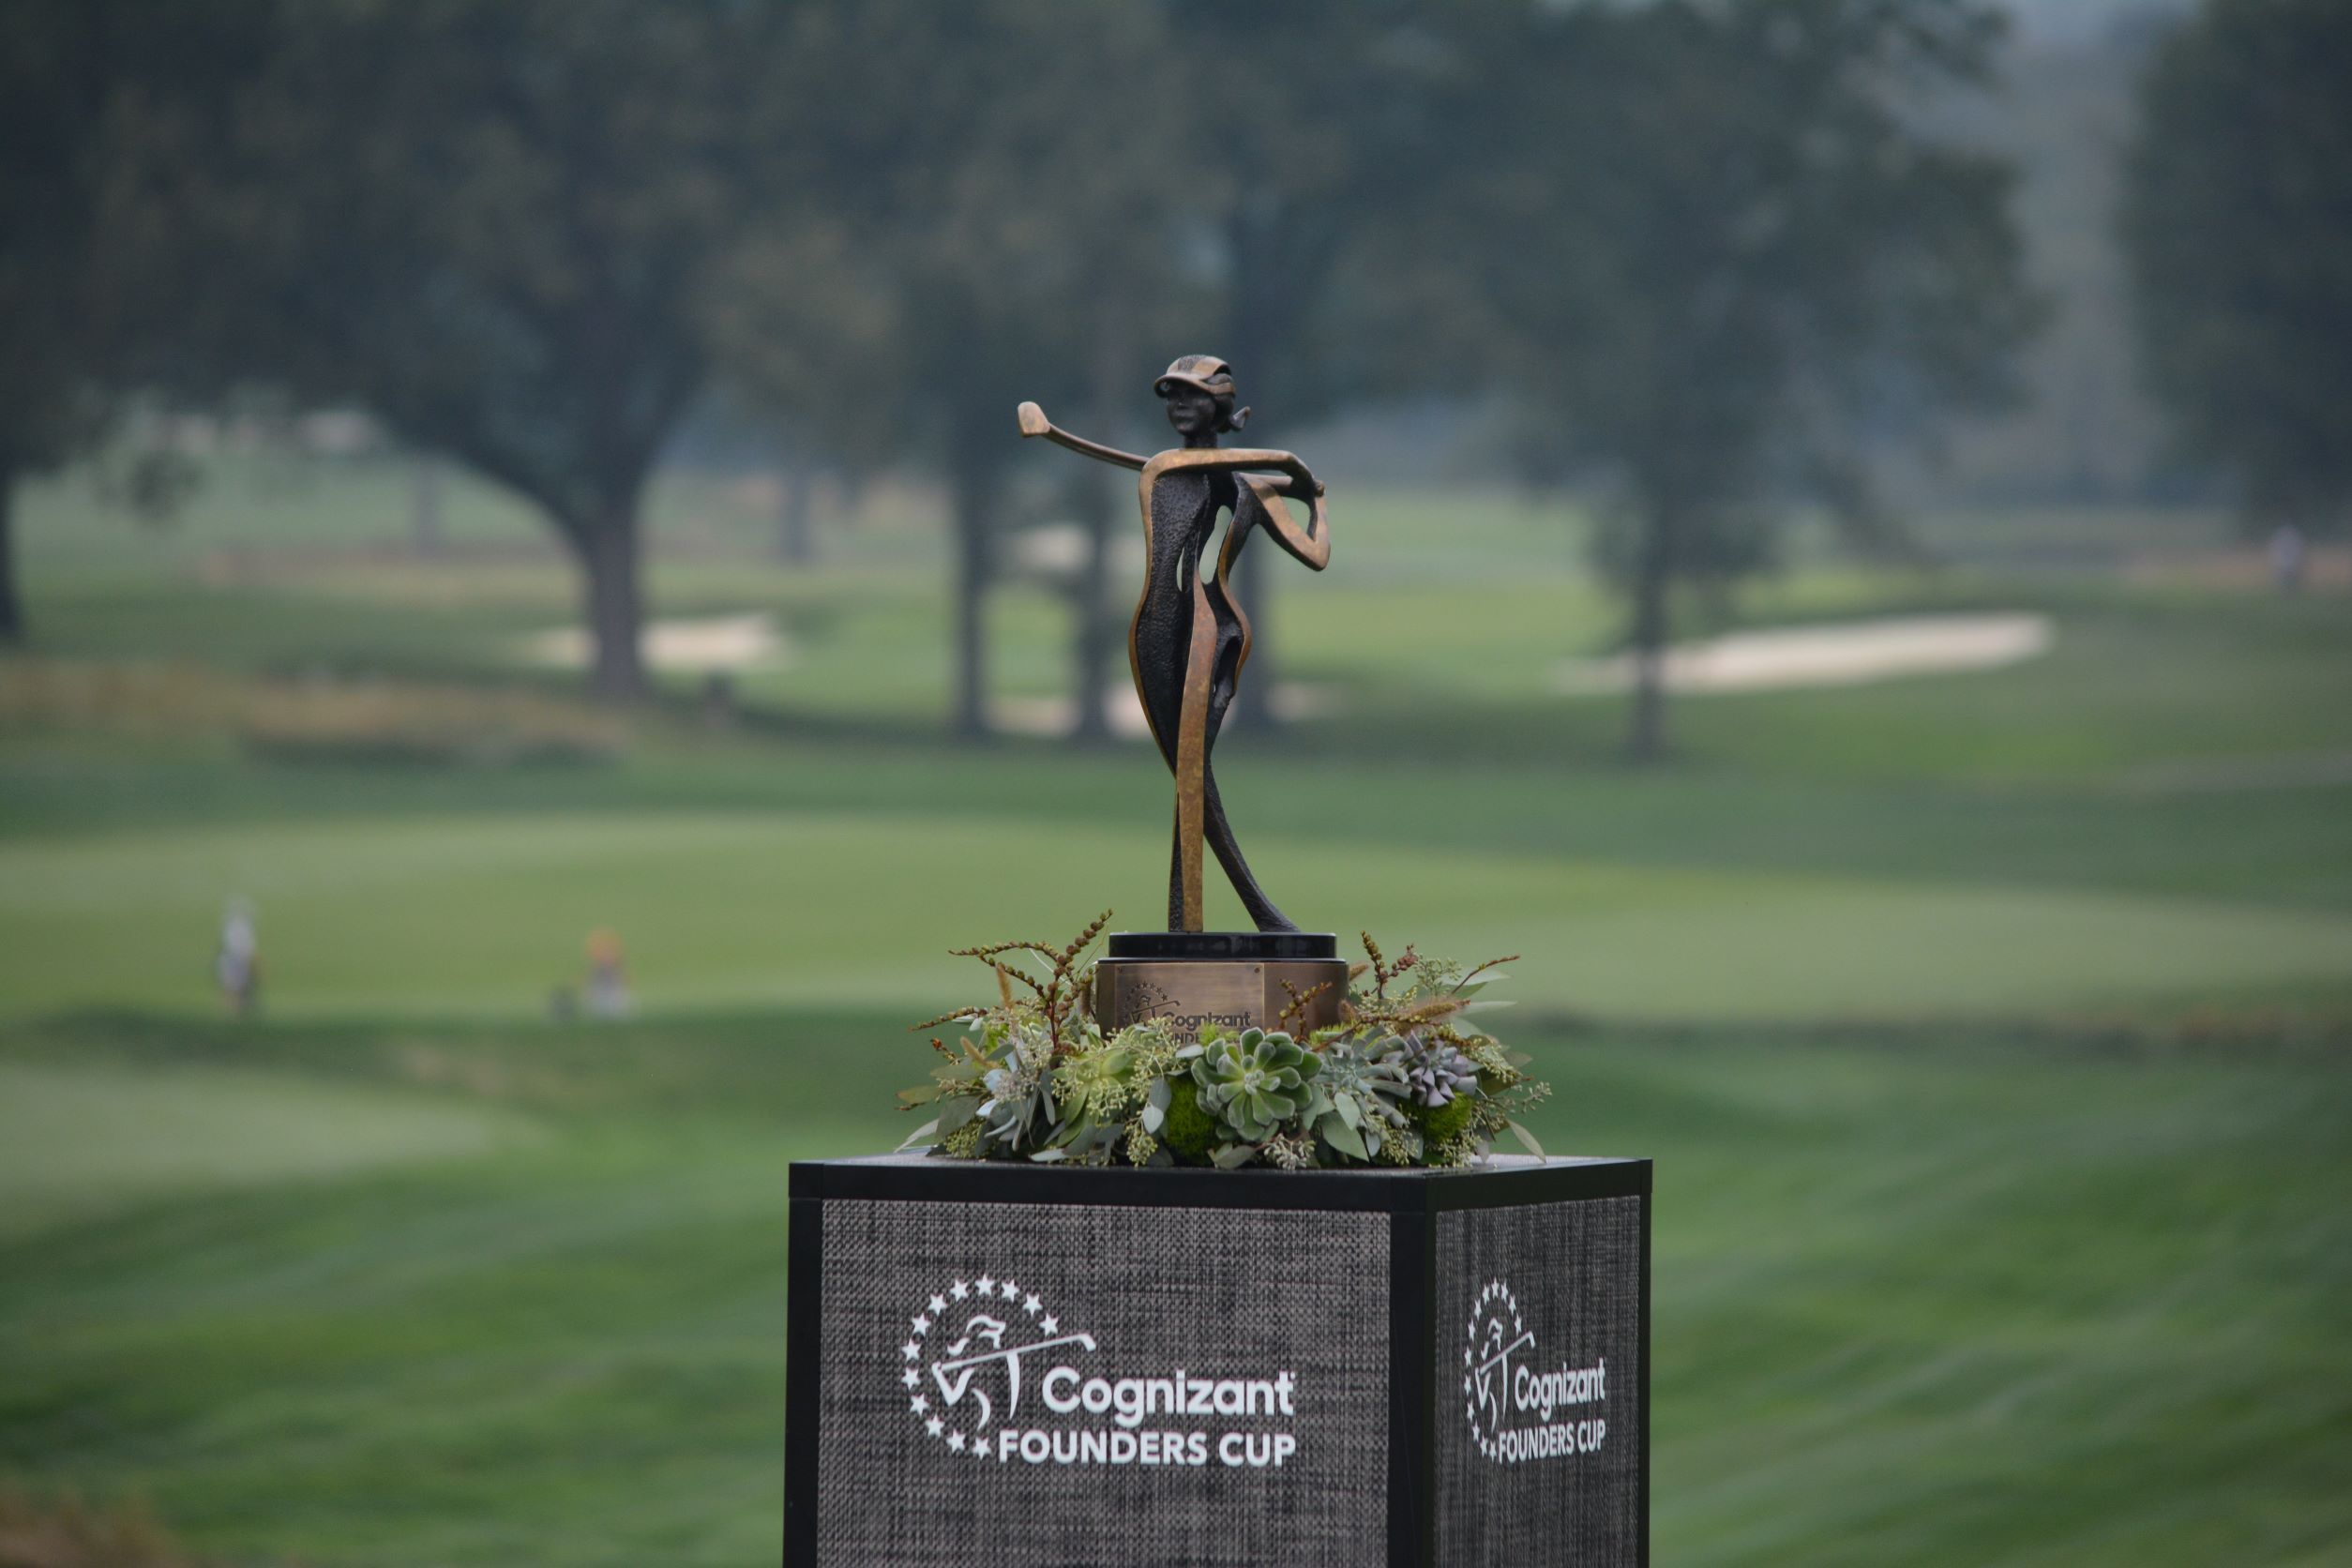 Upper Montclair Country Club to host LPGA Cognizant Founders Cup in